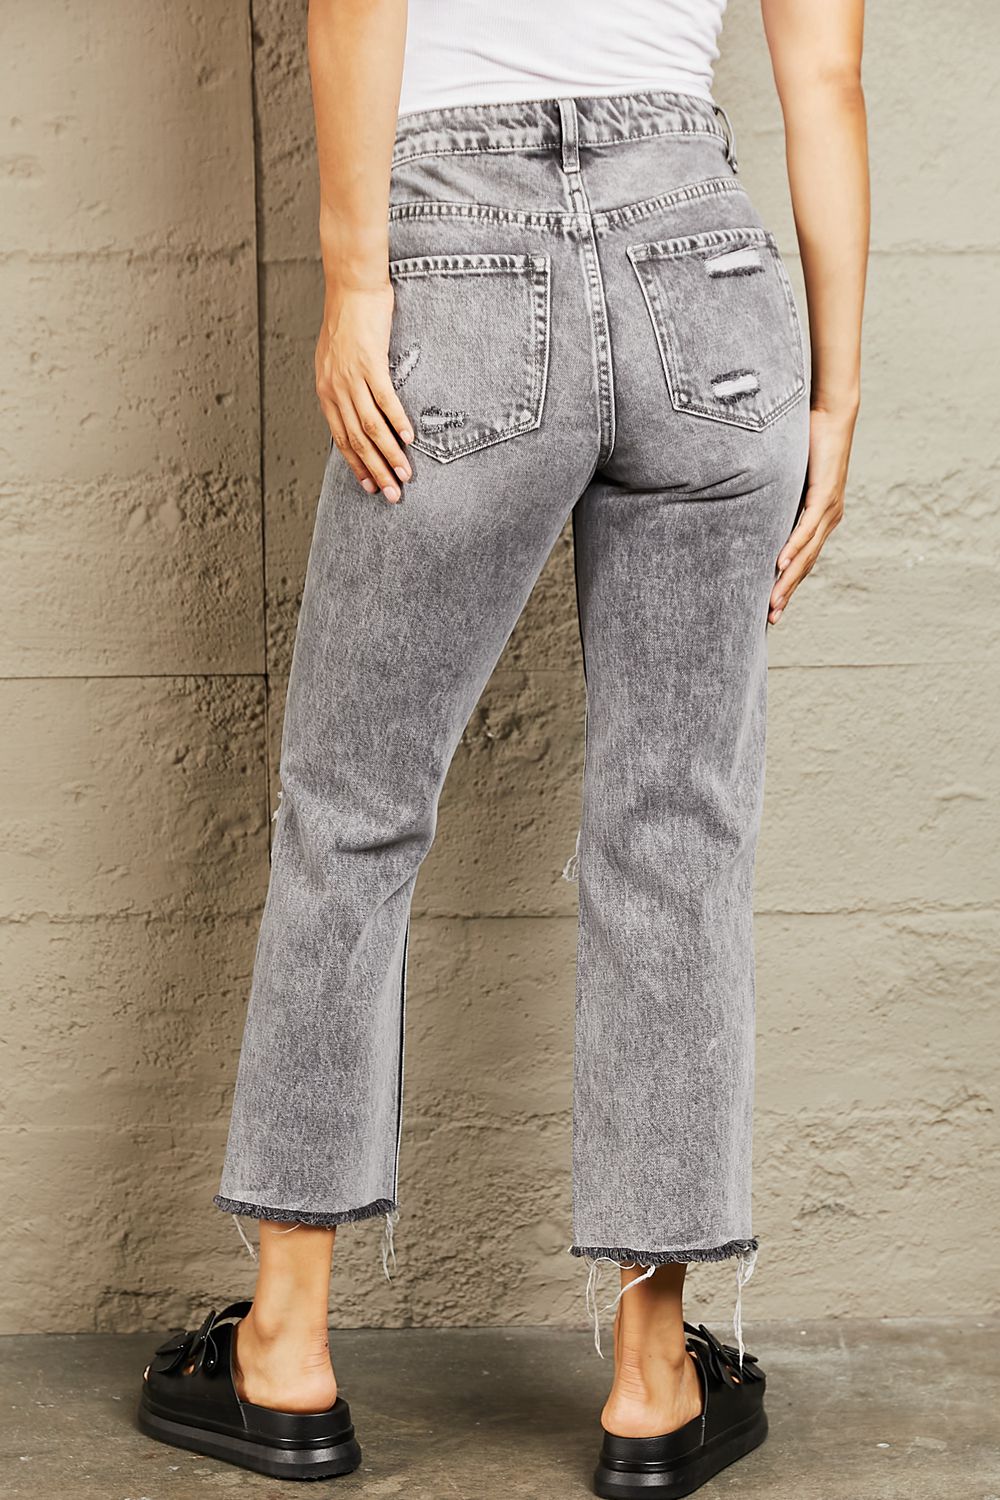 BAYEAS Acid Wash Distressed Cropped Straight Jeans - nailedmoms